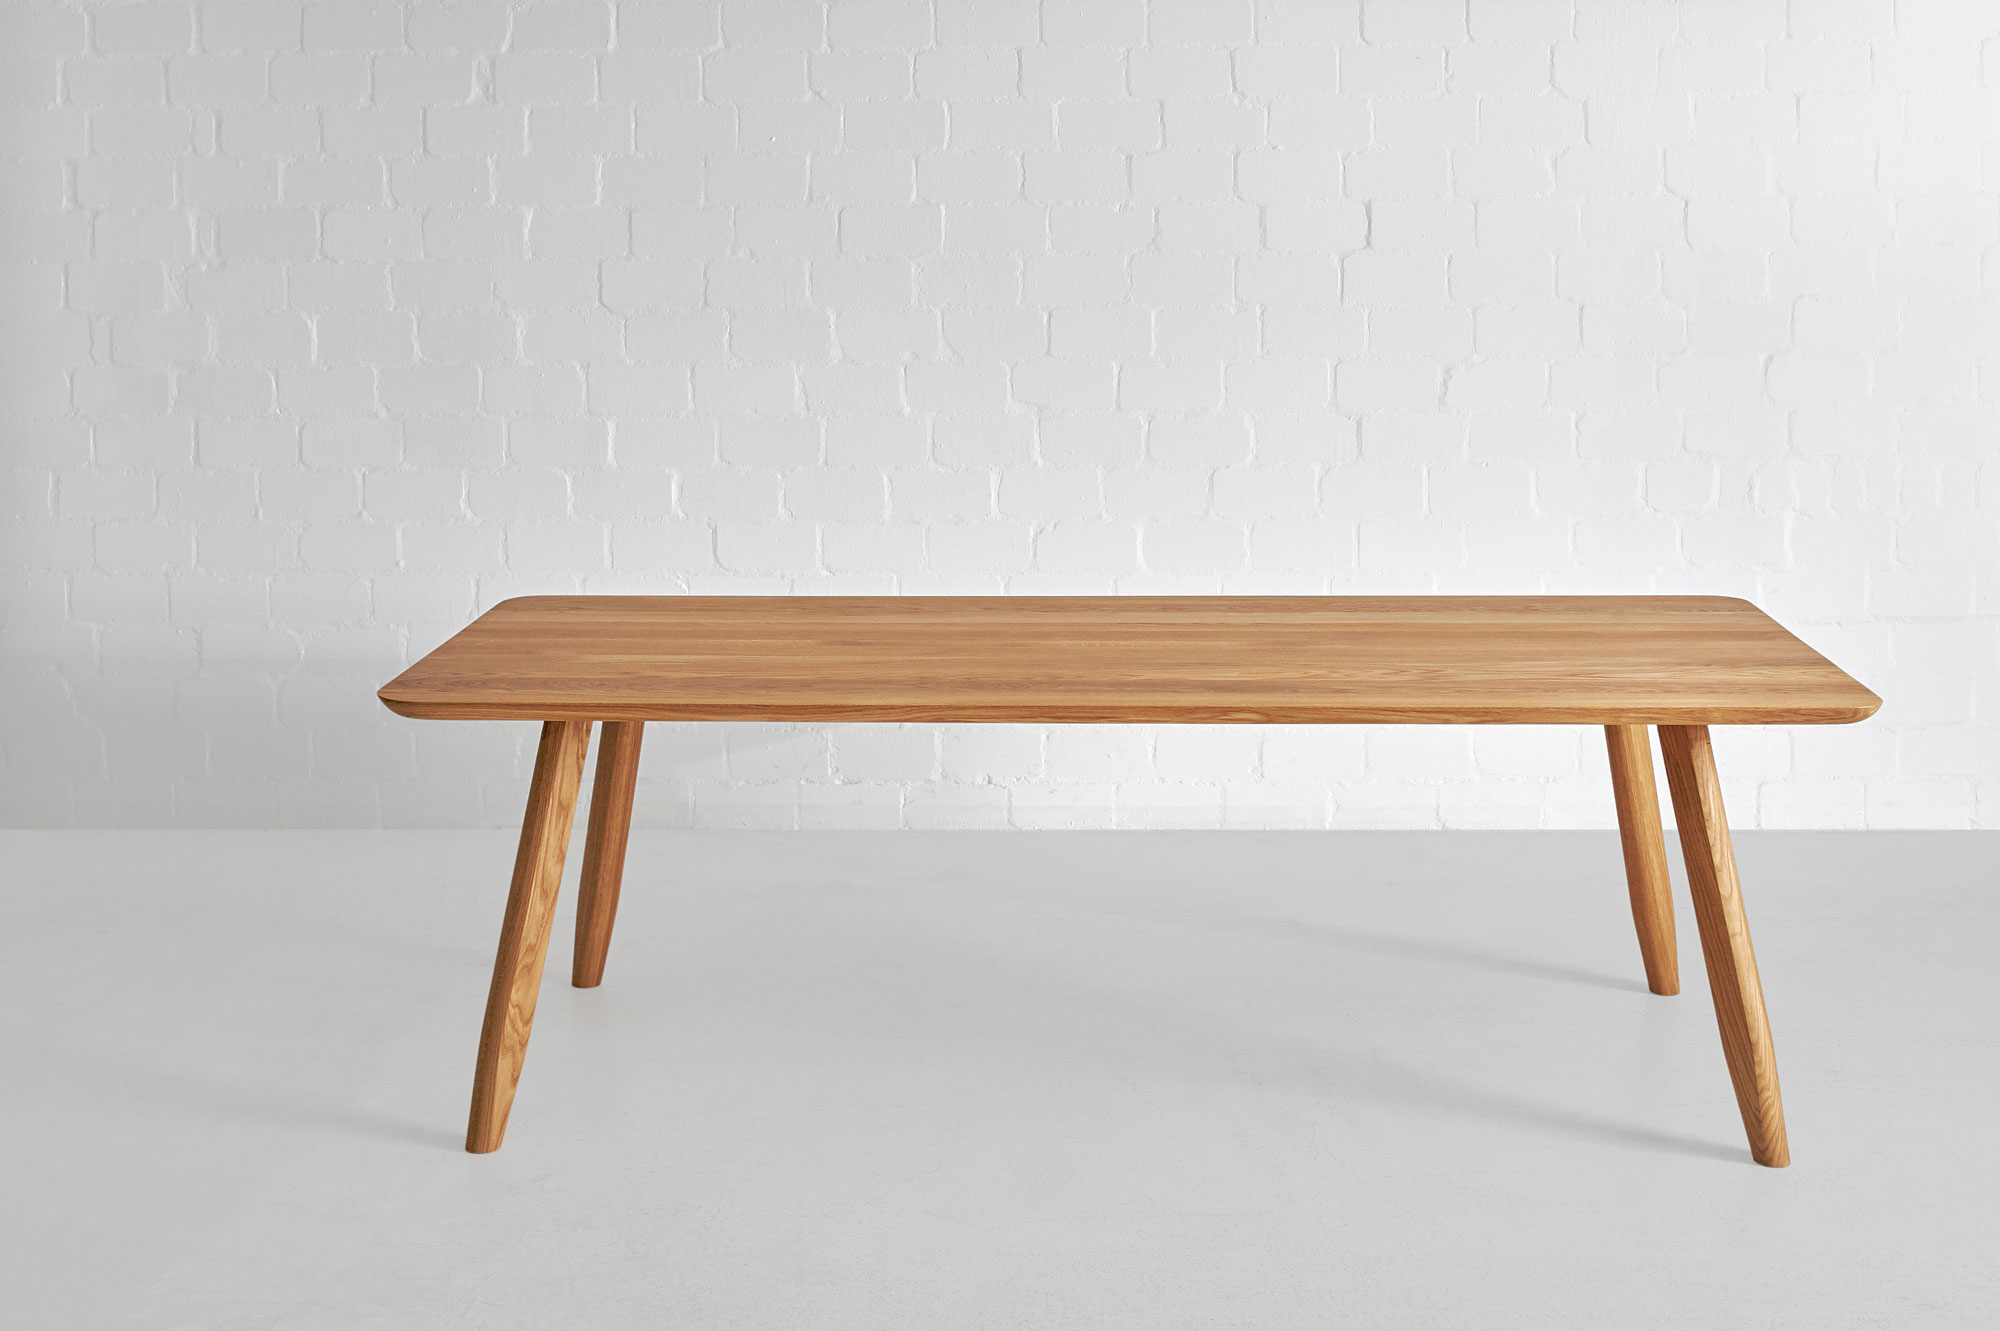 Stylish Dining Table AETAS BASIC 4 0209 custom made in solid wood by vitamin design